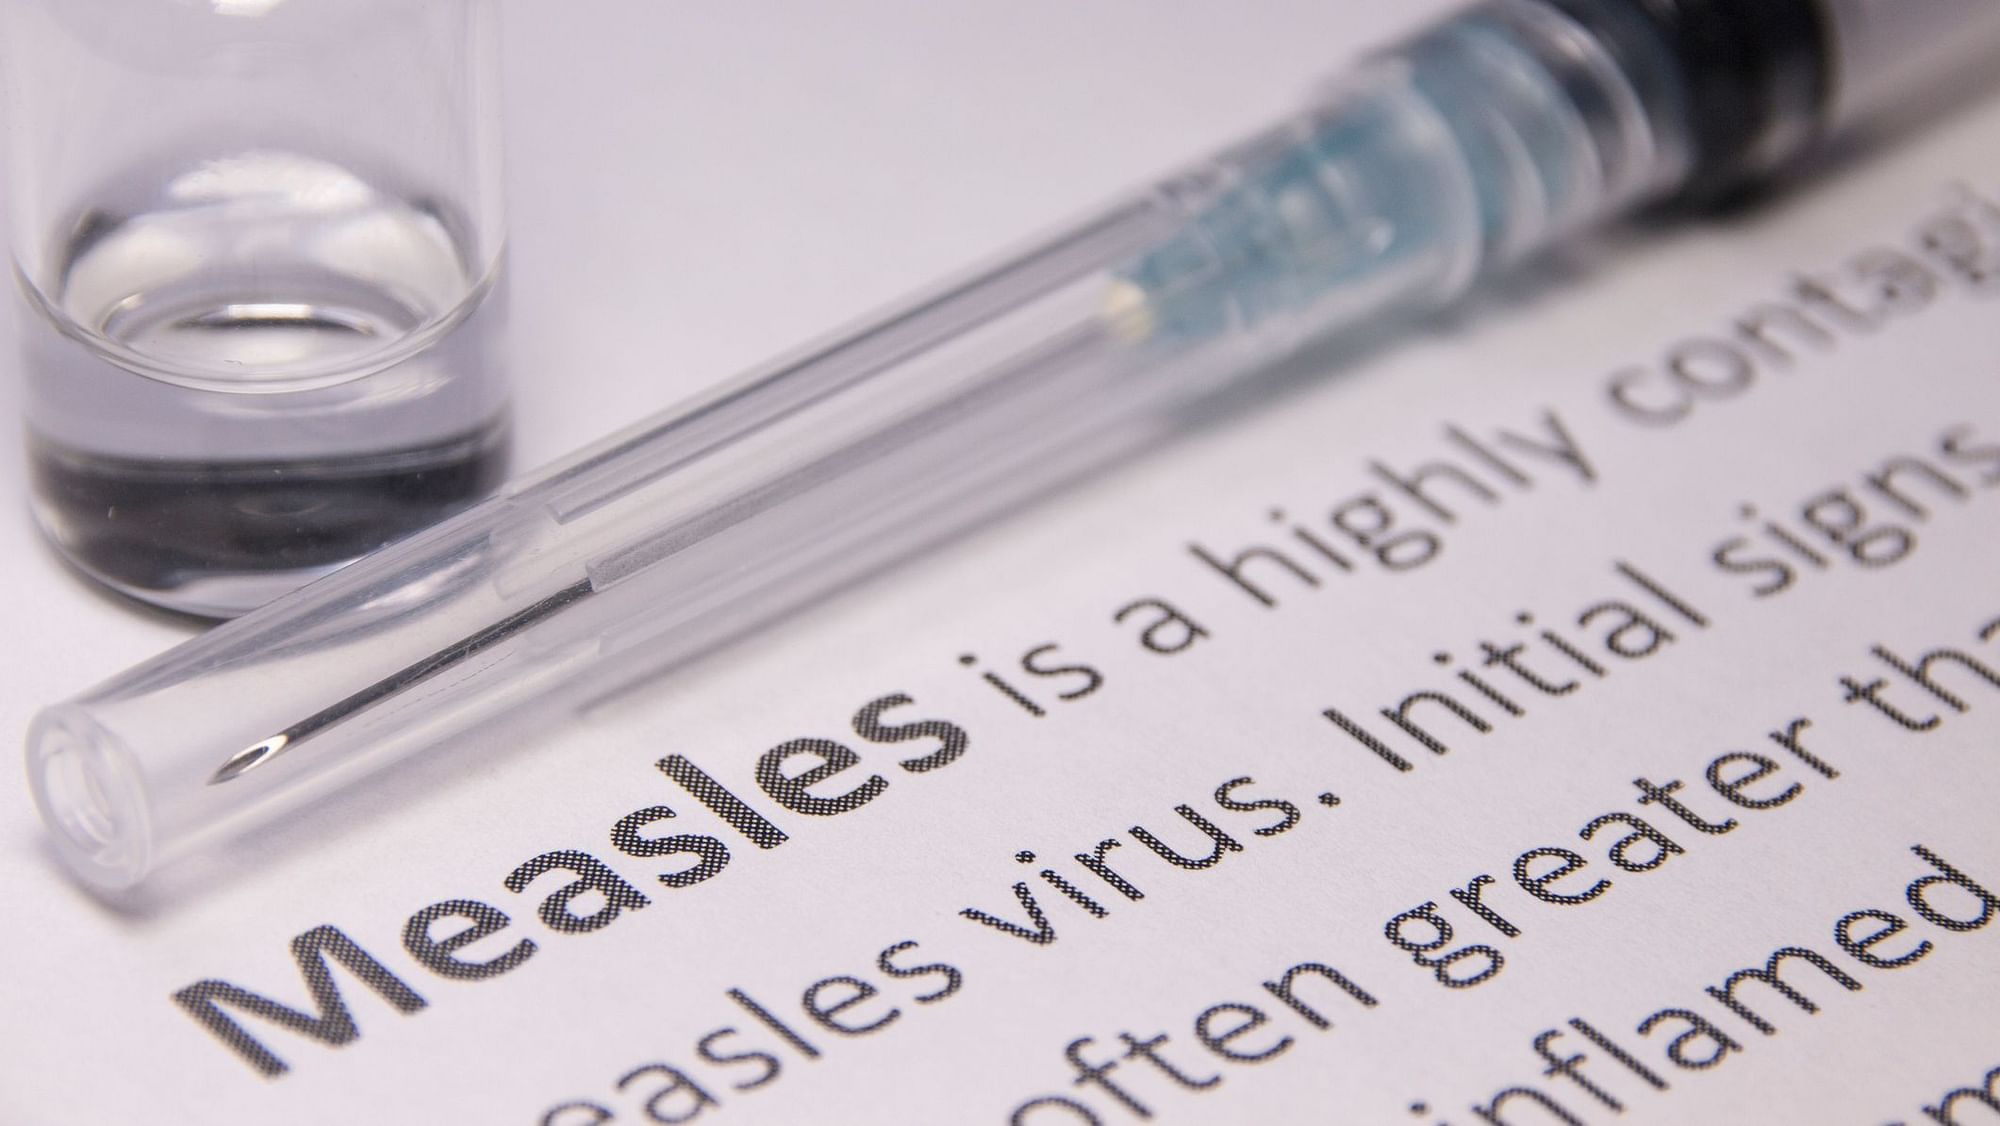 The WHO says cases of measles - a highly contagious viral infection that can prove fatal - surged 300 percent in 2018.